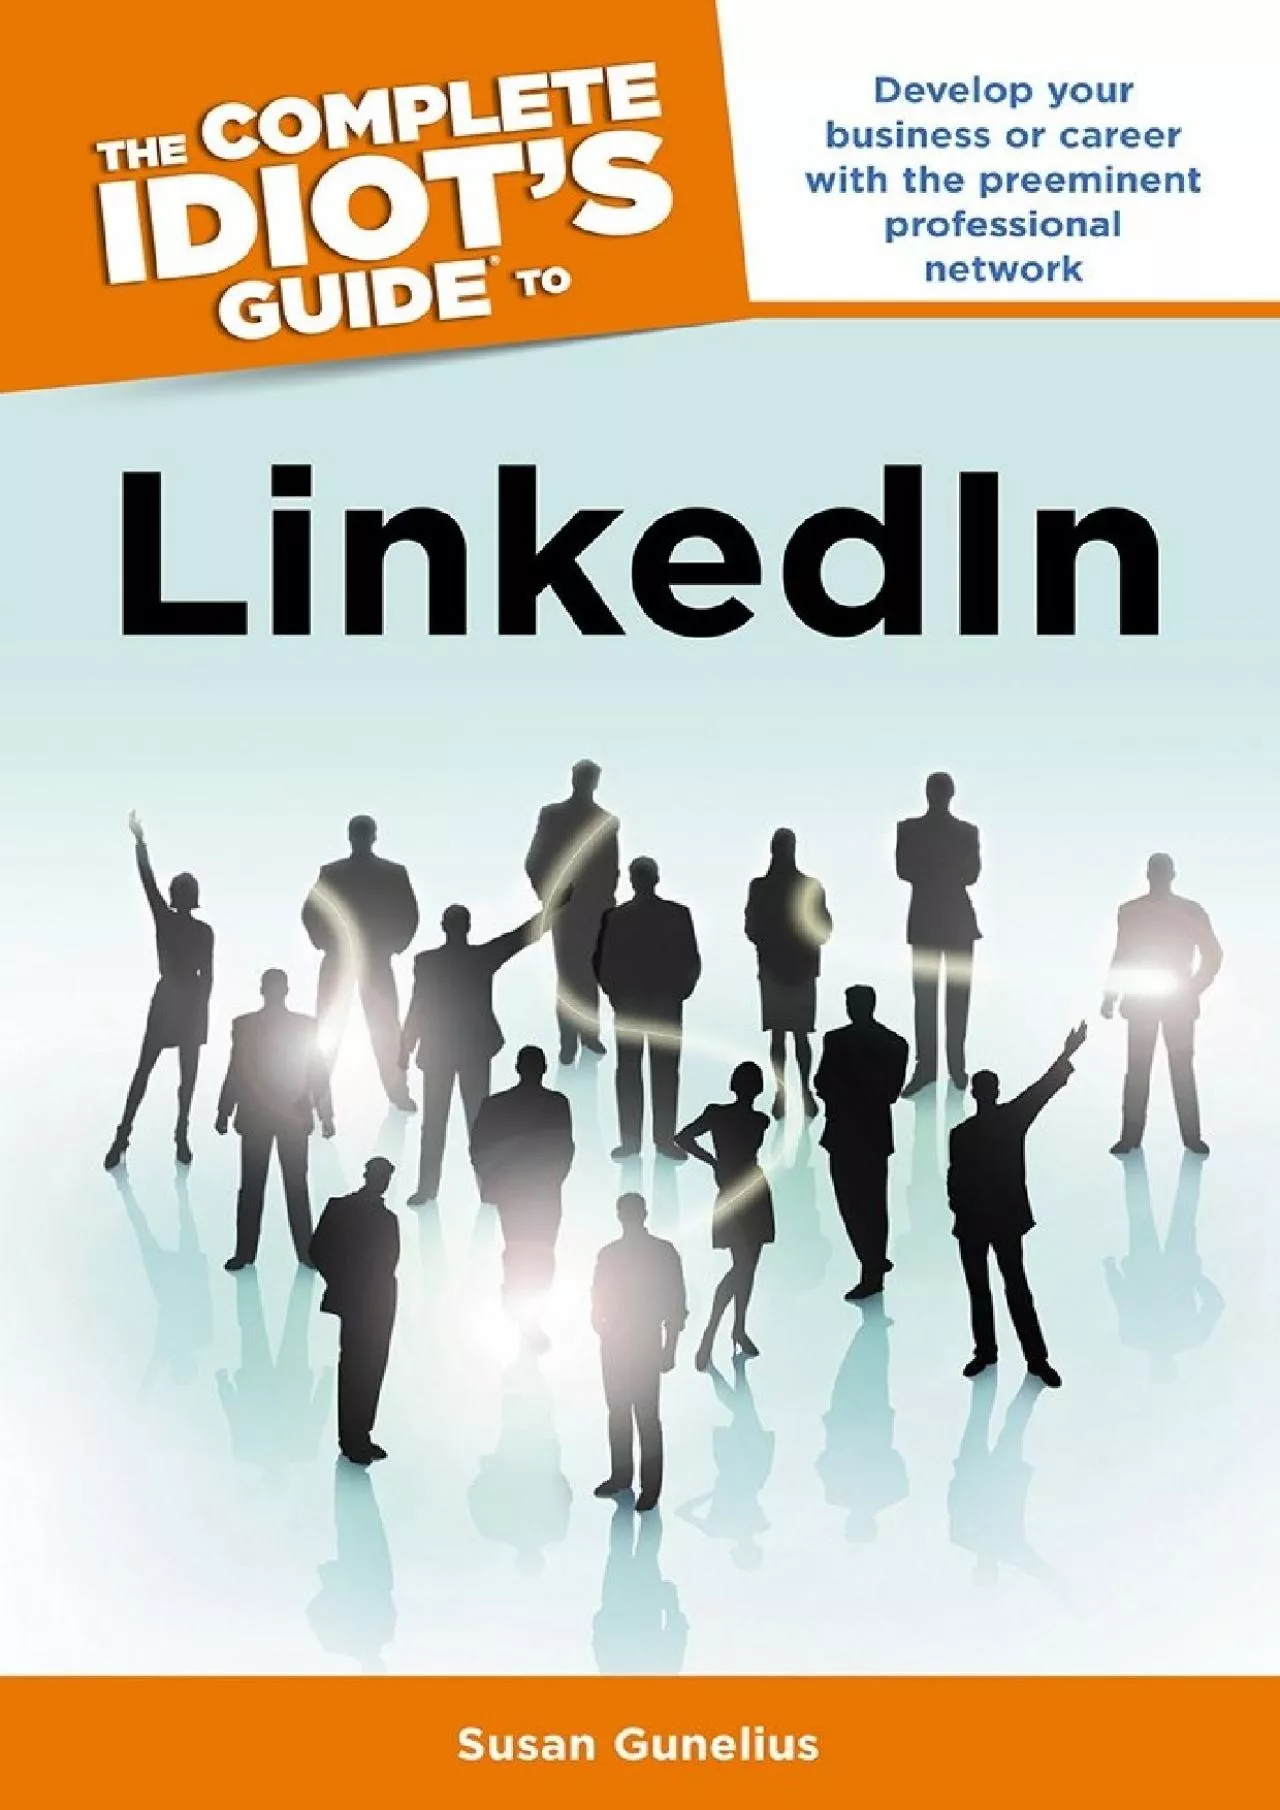 The Complete Idiot\'s Guide to LinkedIn: Develop Your Business or Career with the Preeminent